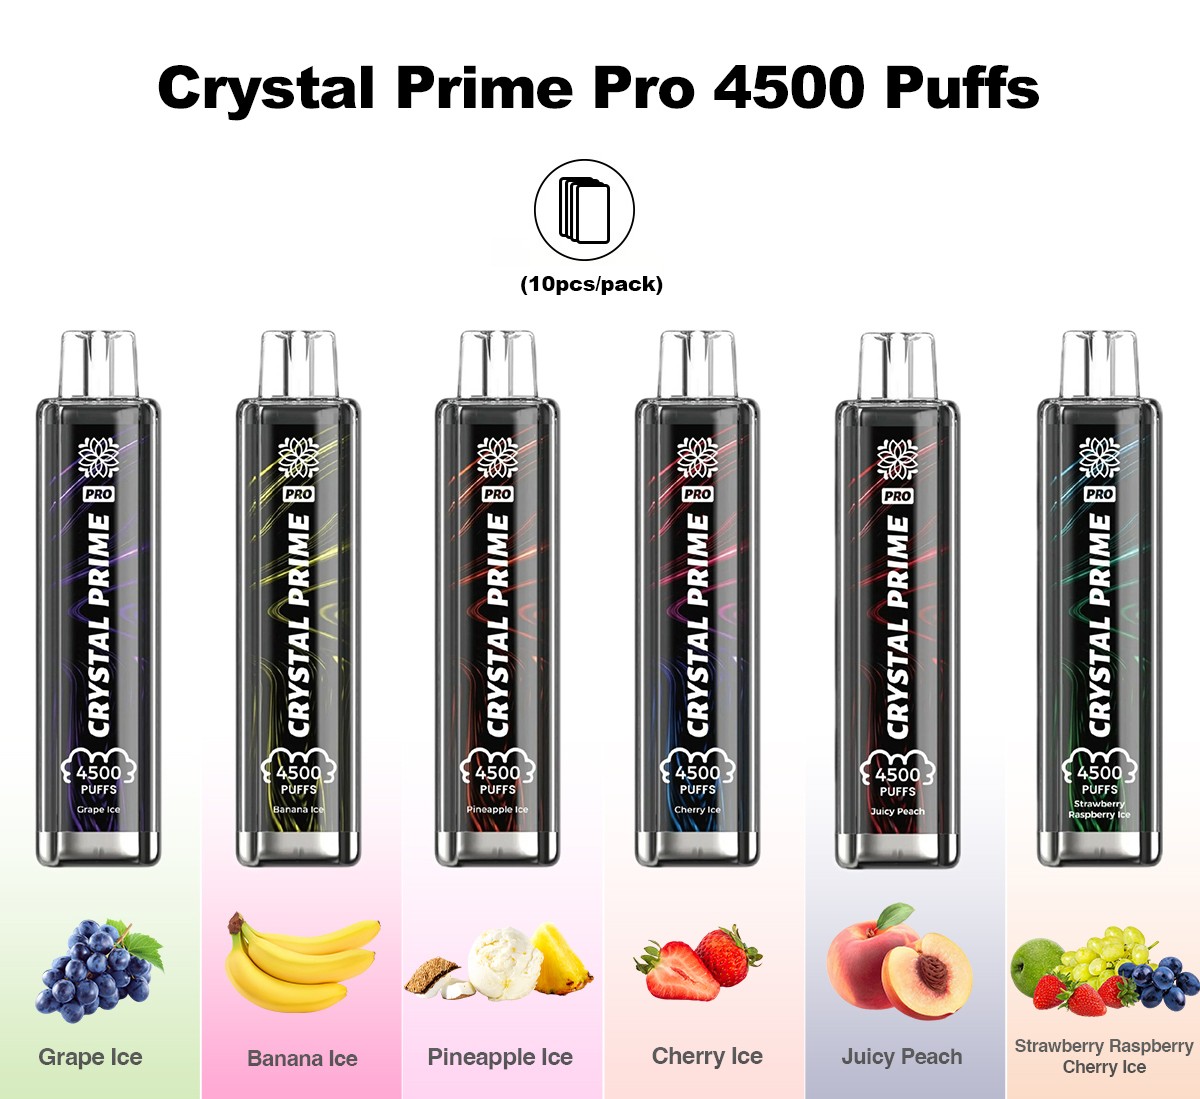 Crystal Prime Pro 4500 Puffs Disposable